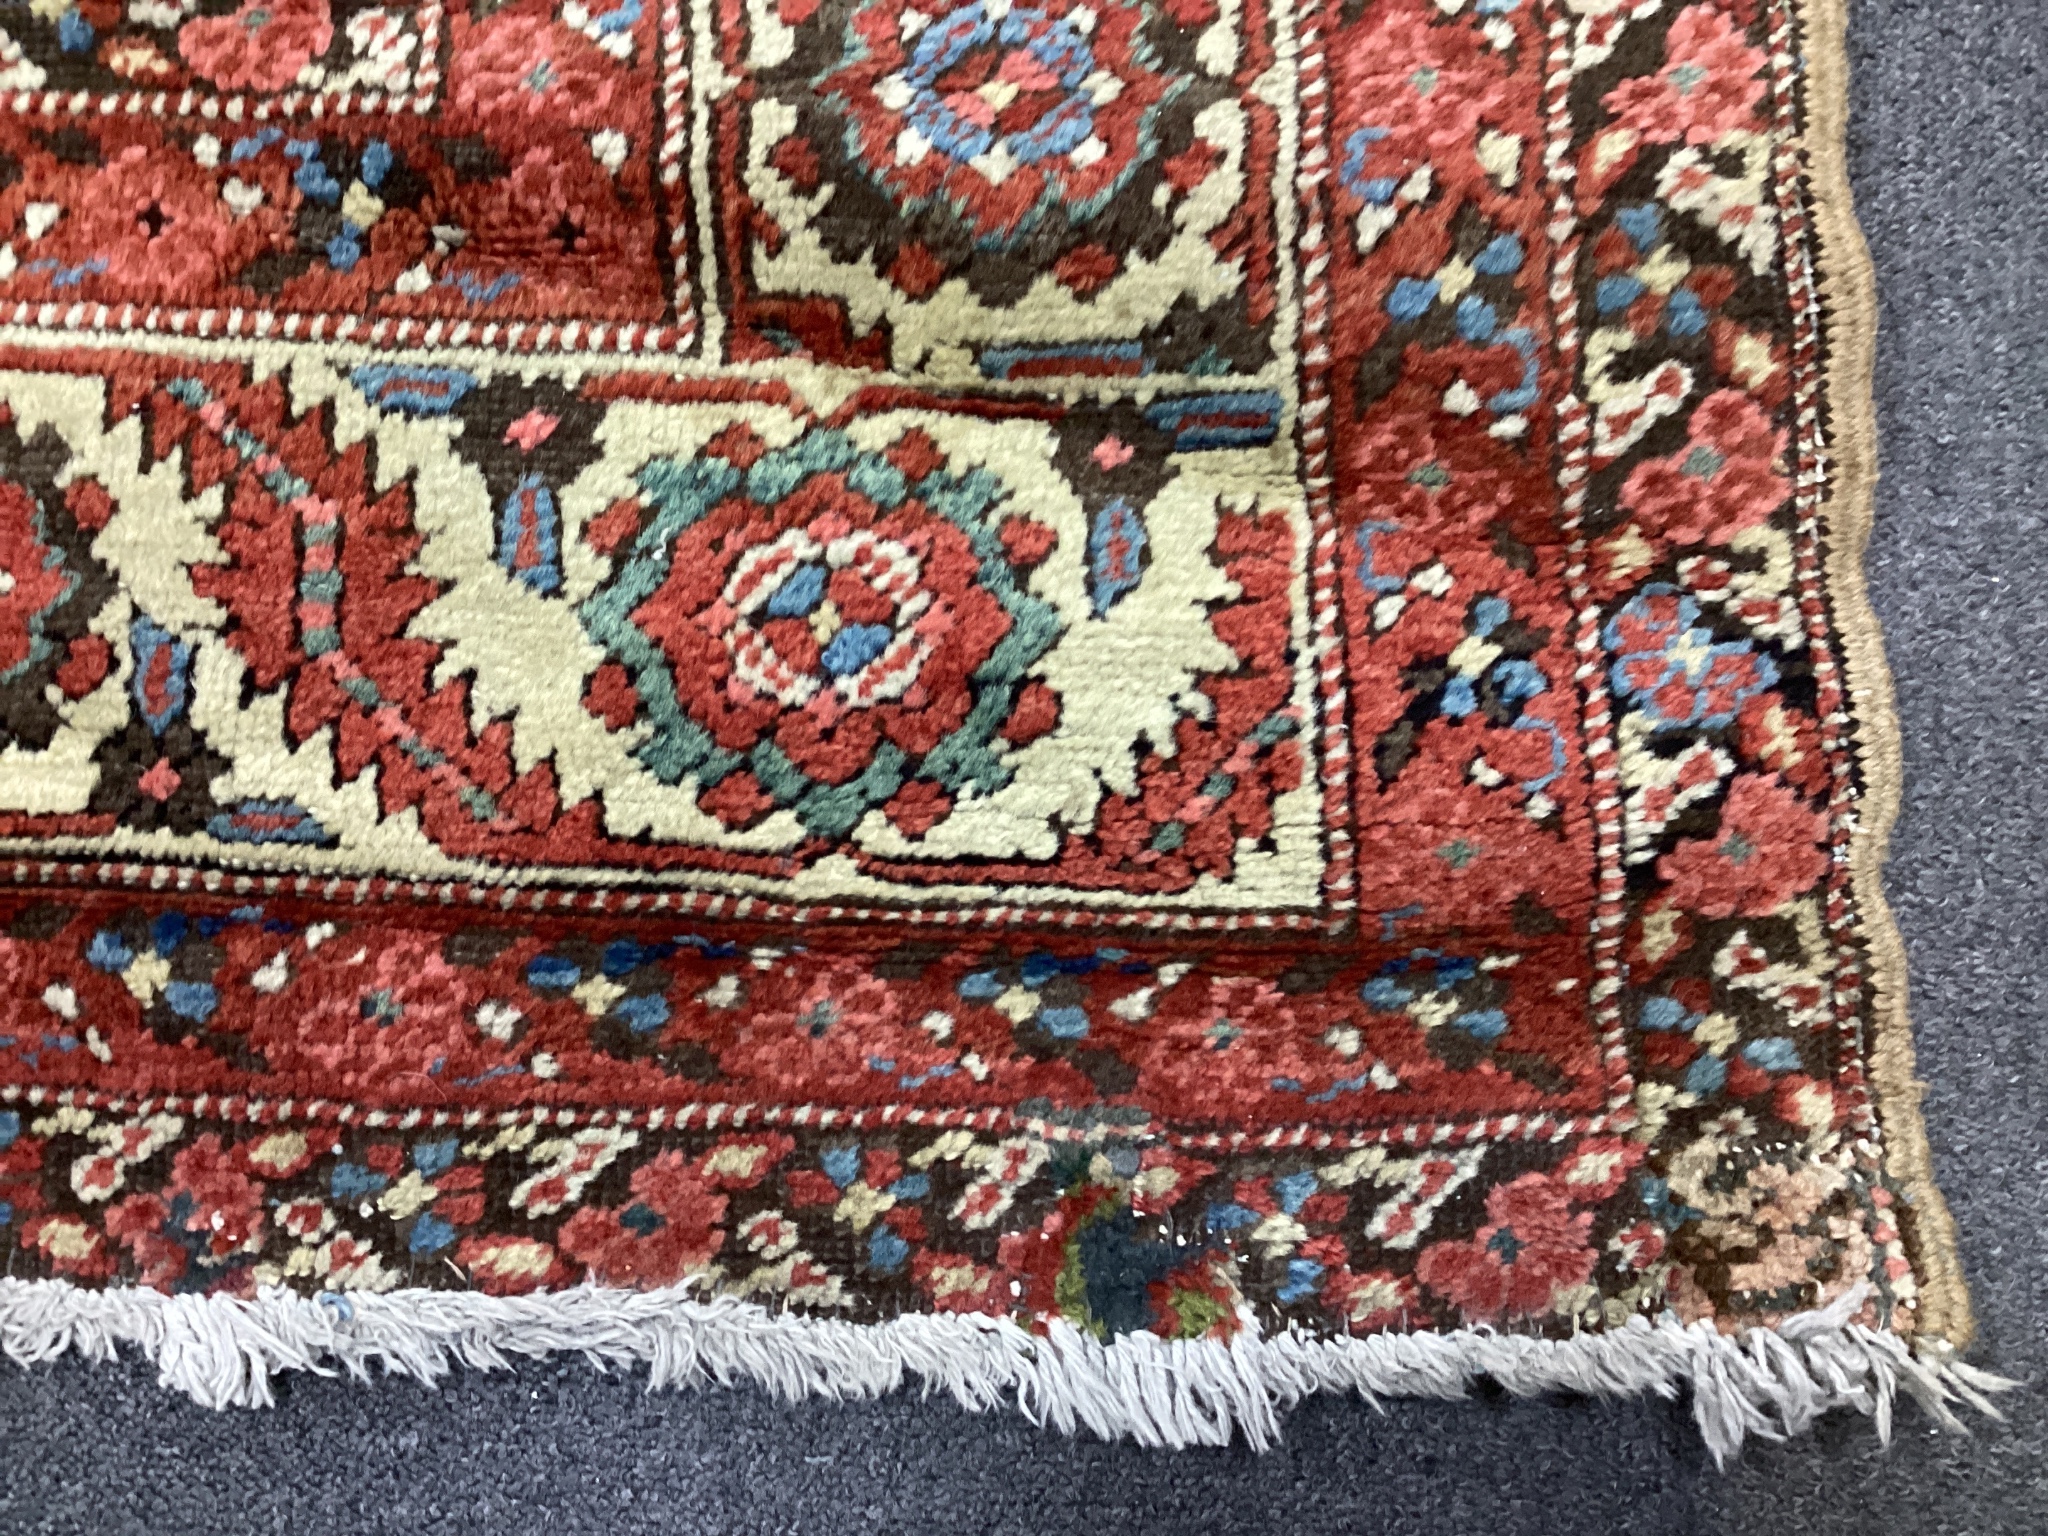 A North West Persian brick red ground carpet, 340 x 216cm